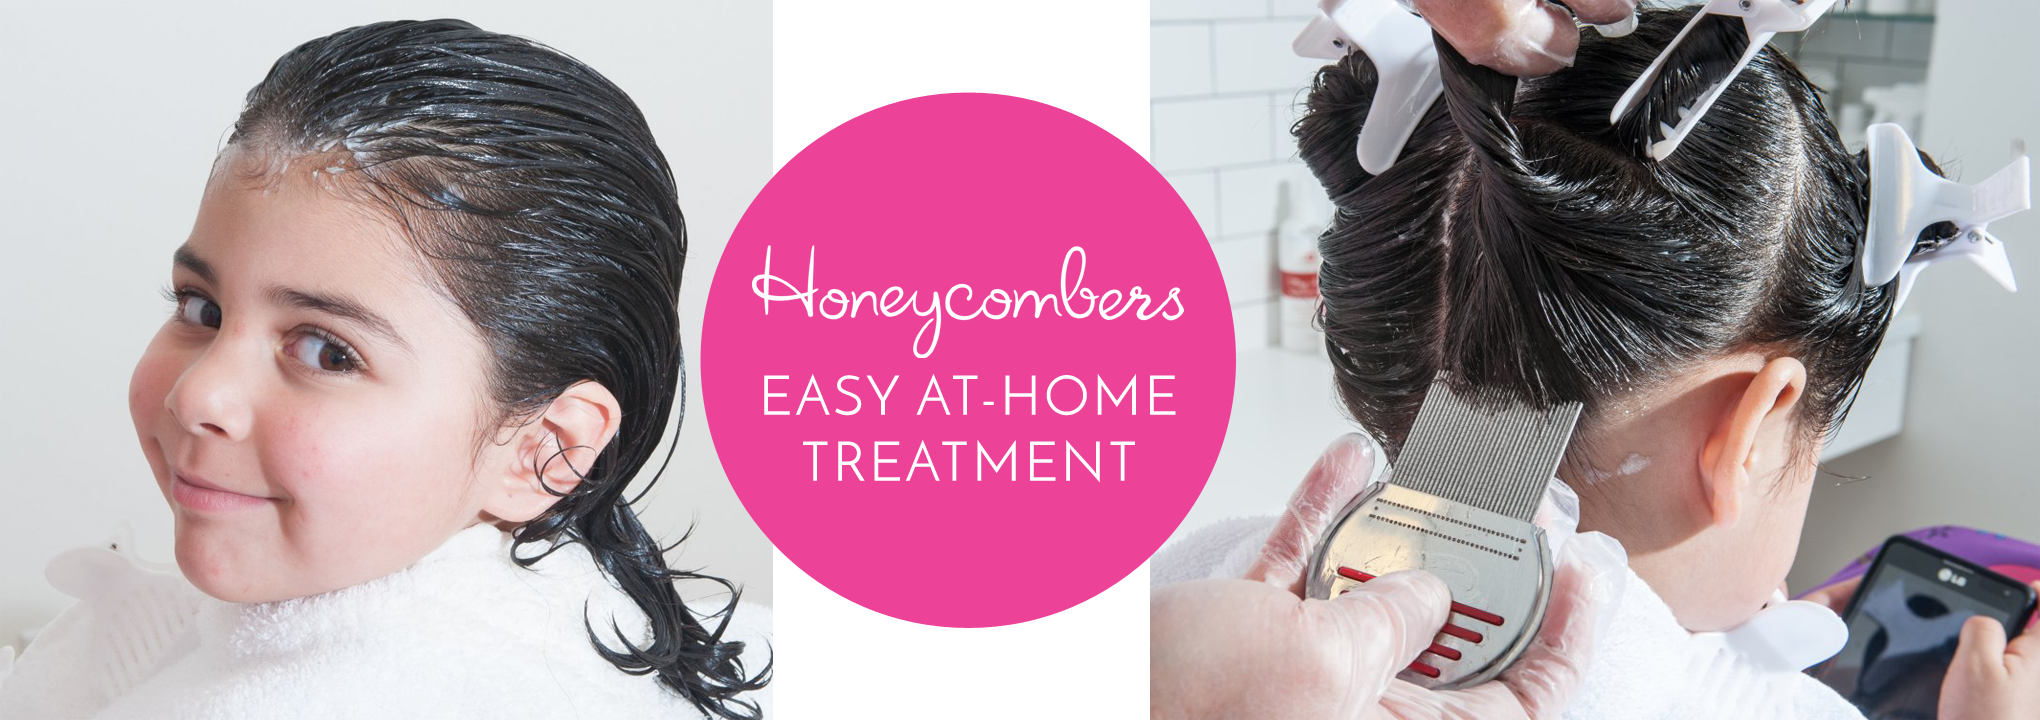 Easy at-home treatment